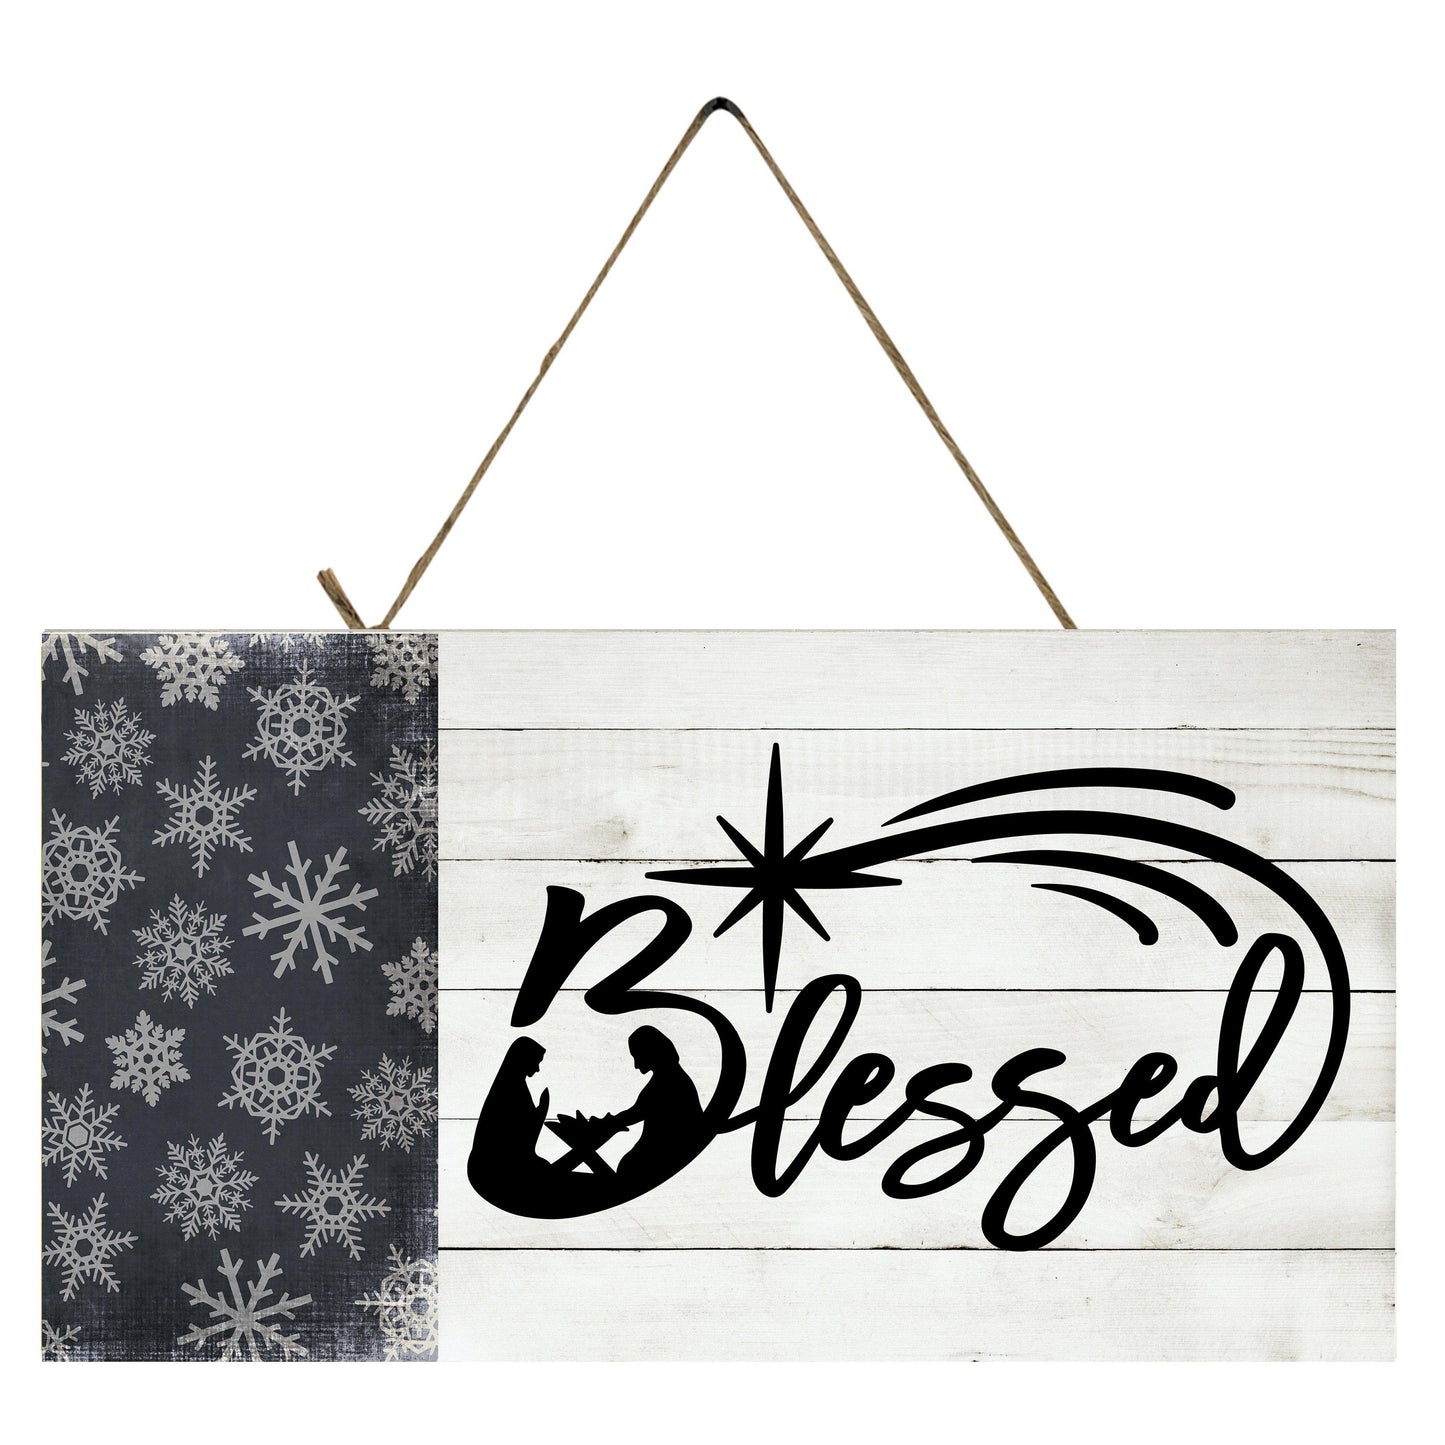 Blessed Nativity Christmas Printed Handmade Wood Sign